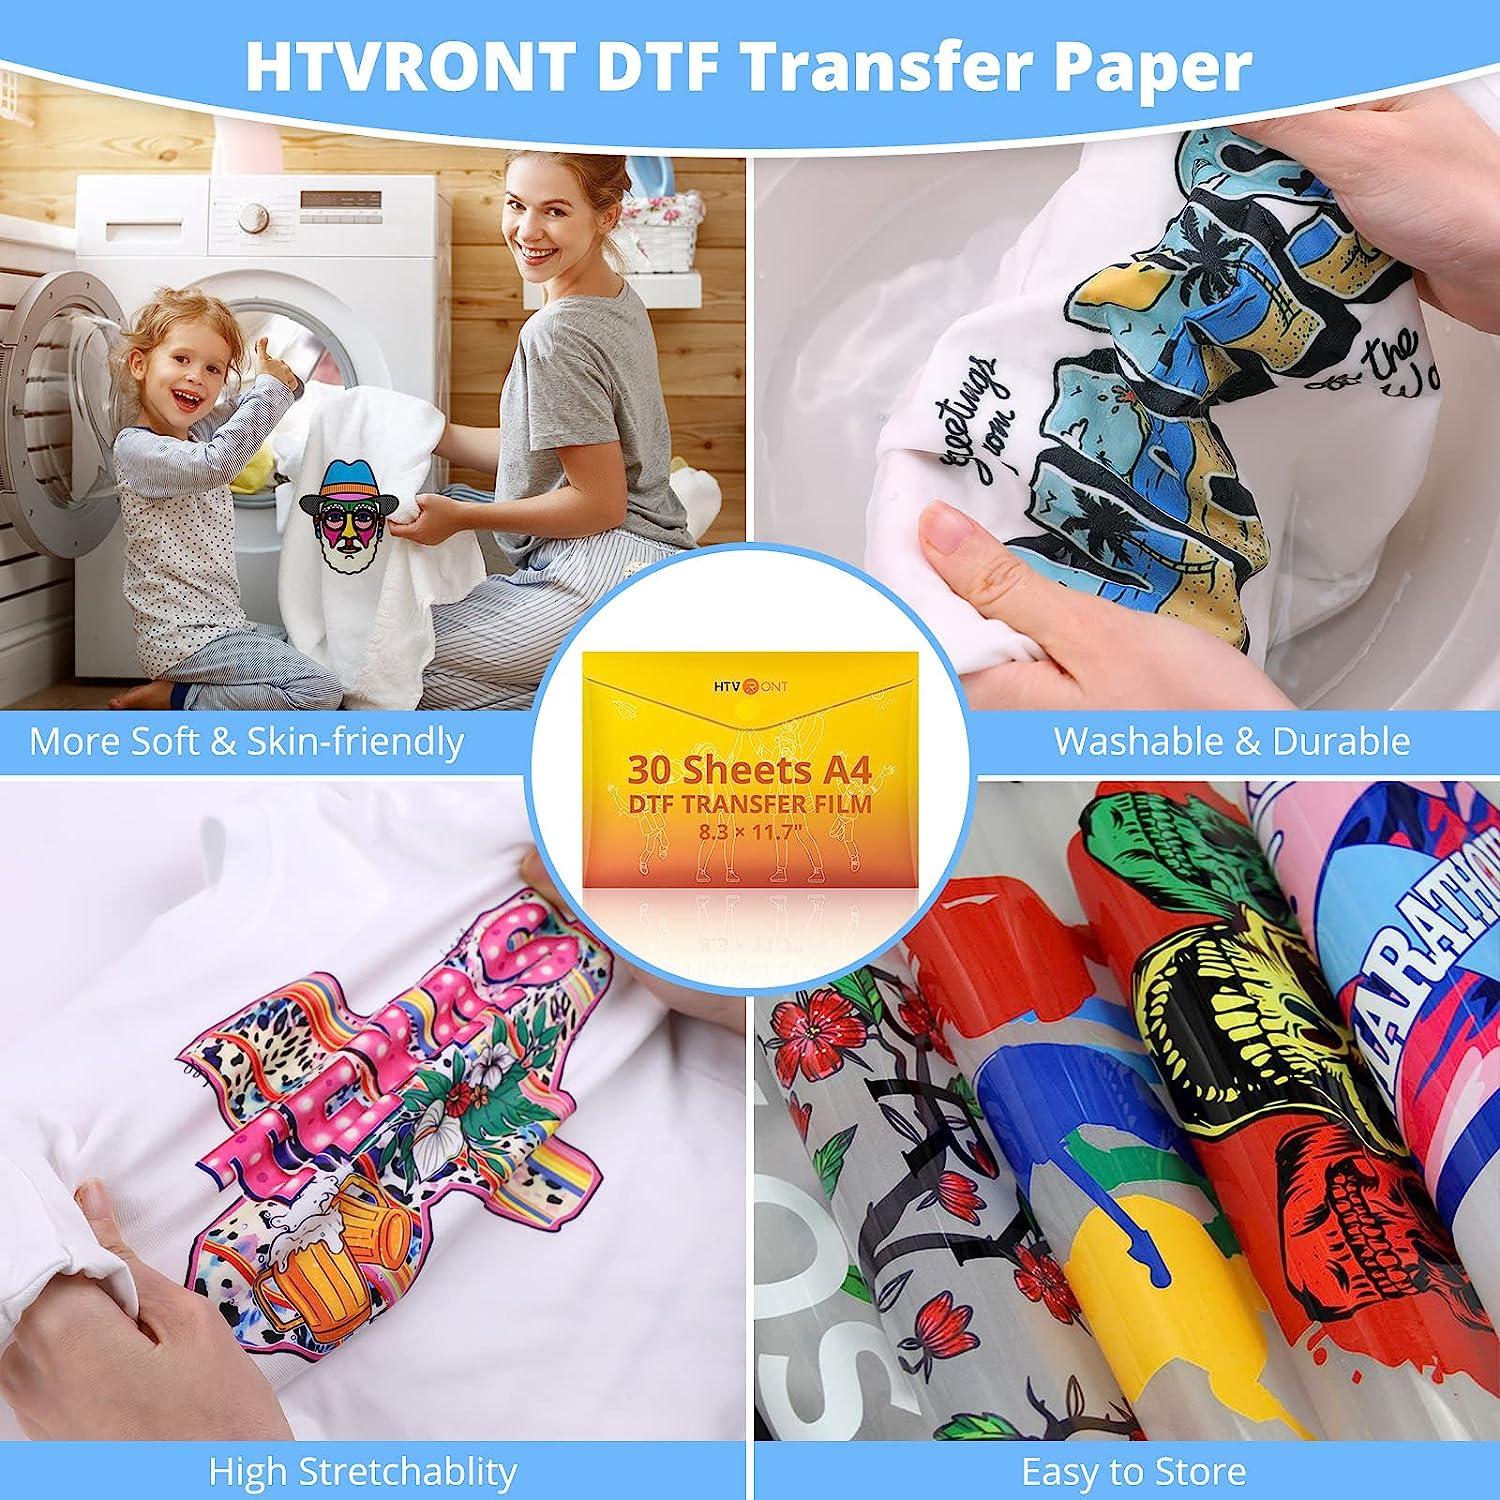 HTVRONT DTF Transfer Film for Sublimation - 30 Sheets of A4 (8.3×11.7) DTF  Paper for Inkjet Printers, Direct to Film Transfer Paper for Cotton T